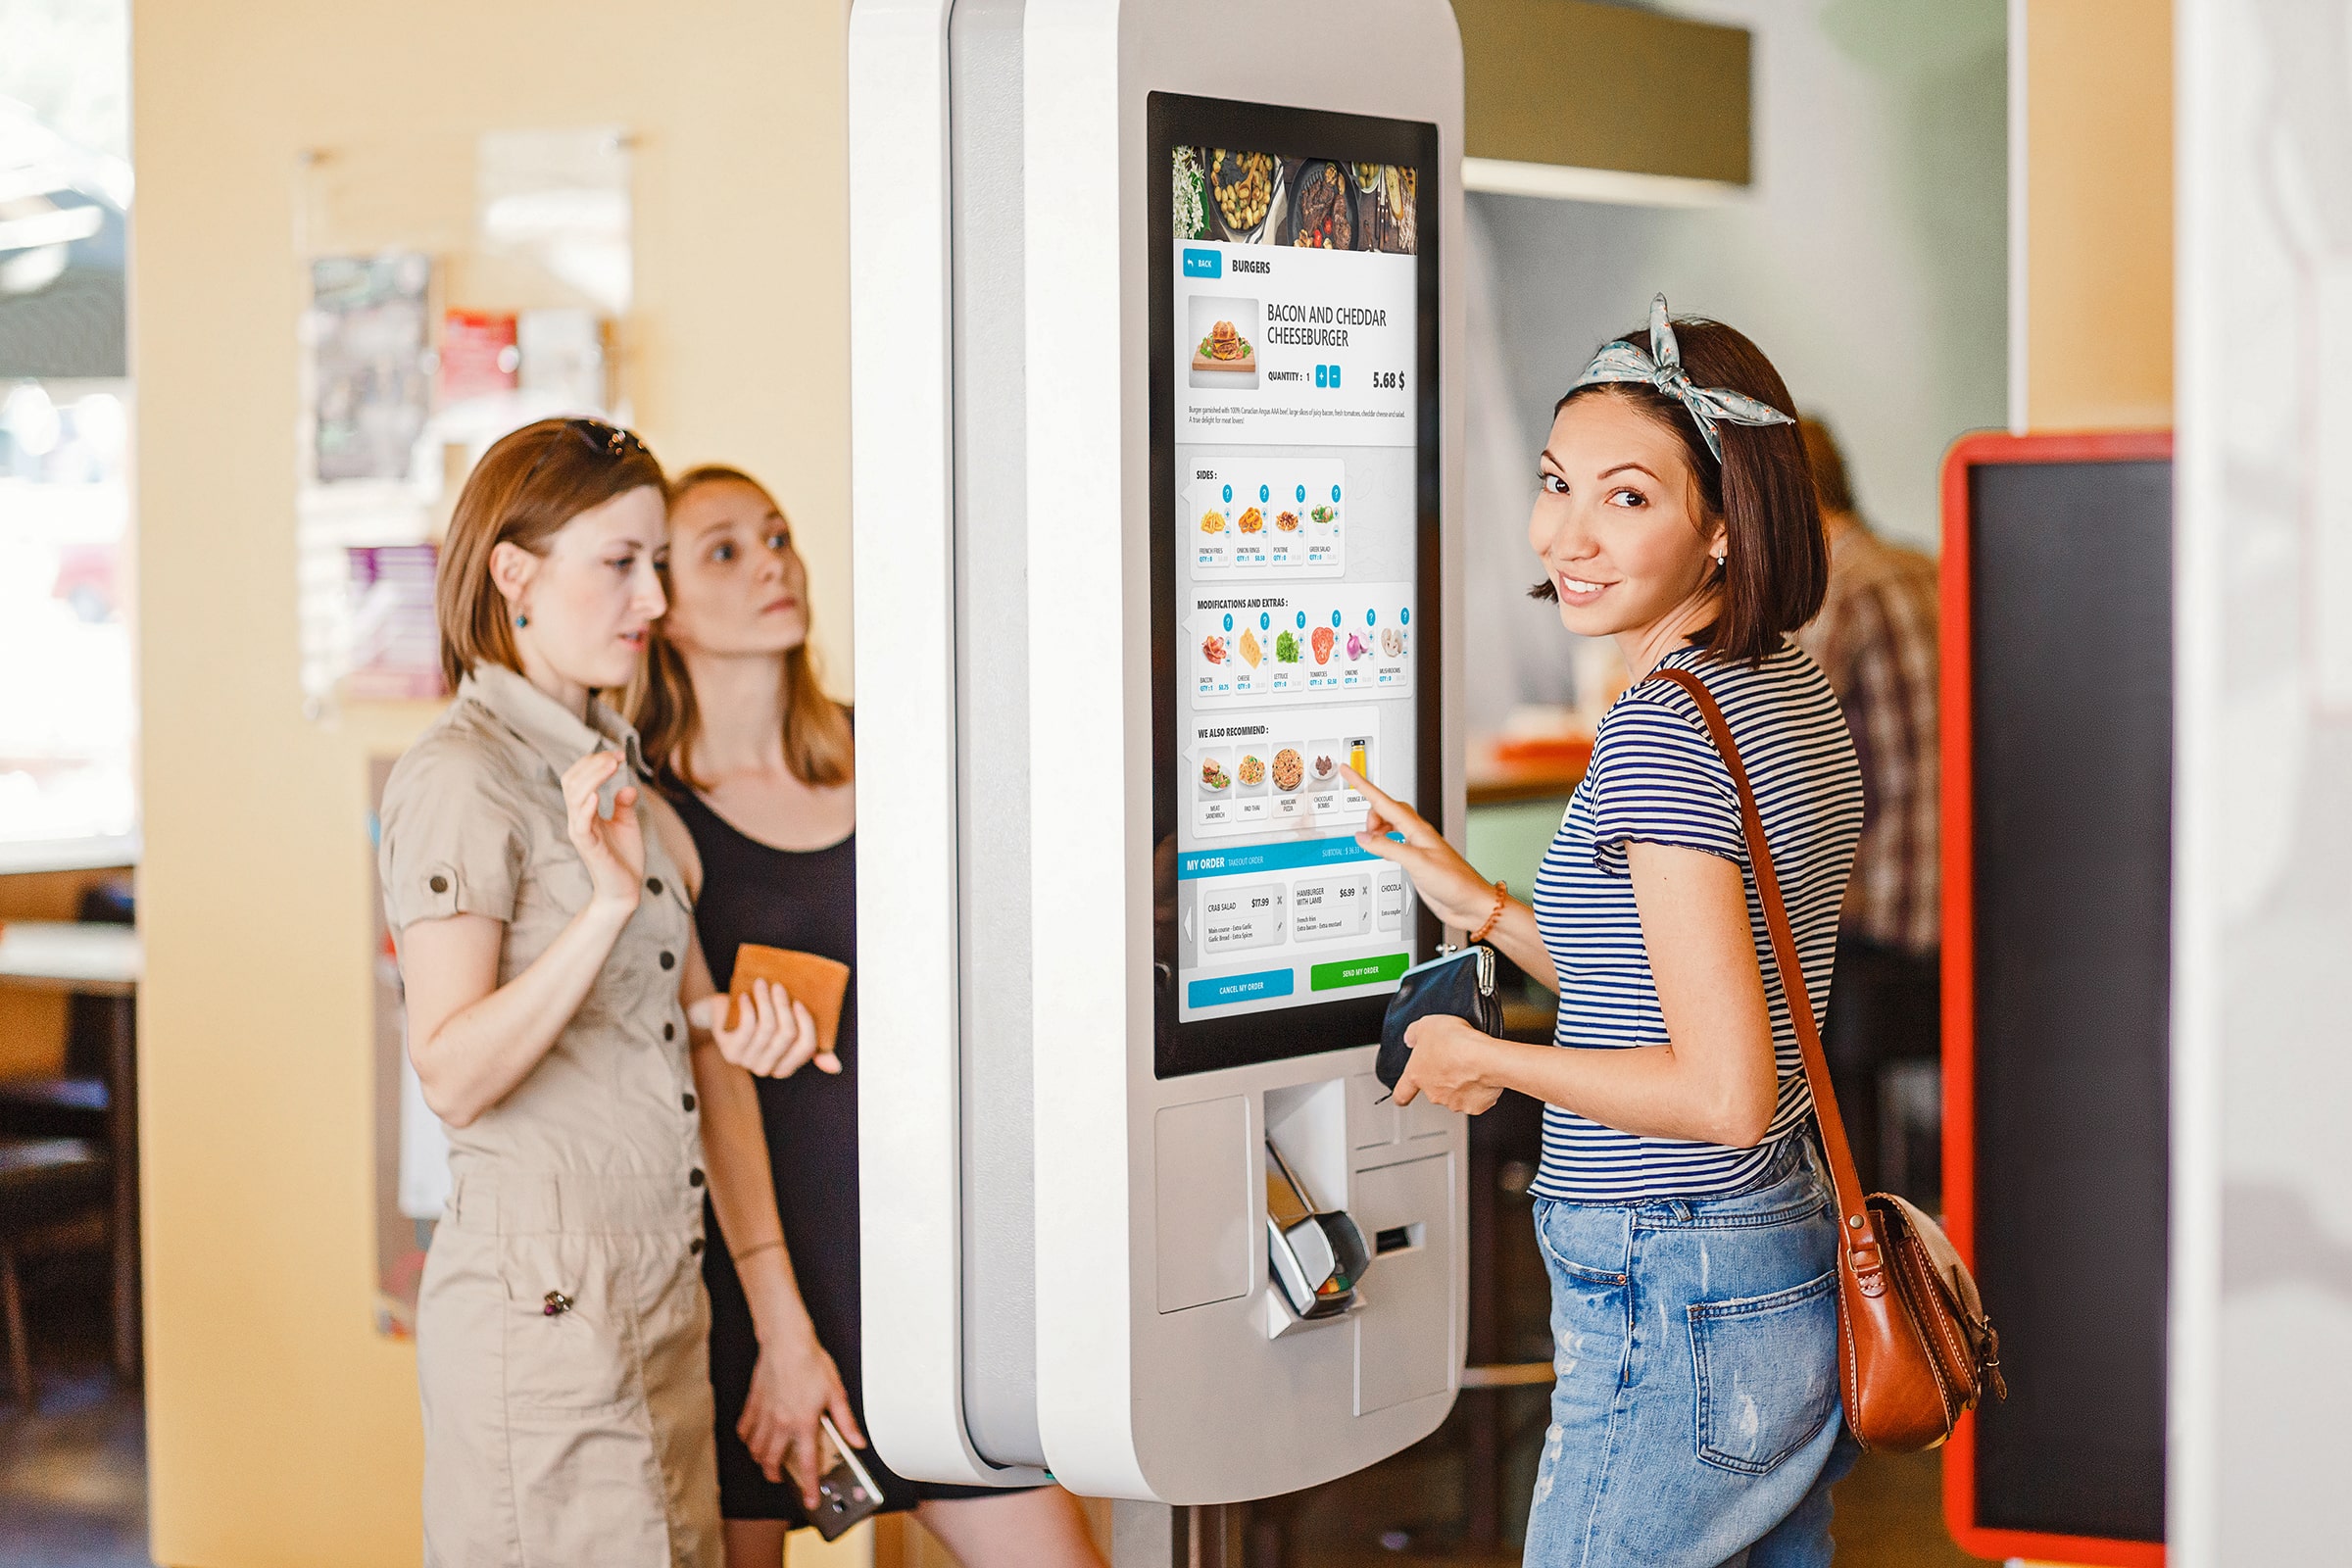 A customer interacts with a Veloce self-service kiosk, demonstrating the system's user-friendly interface for placing orders in a quick-service restaurant.